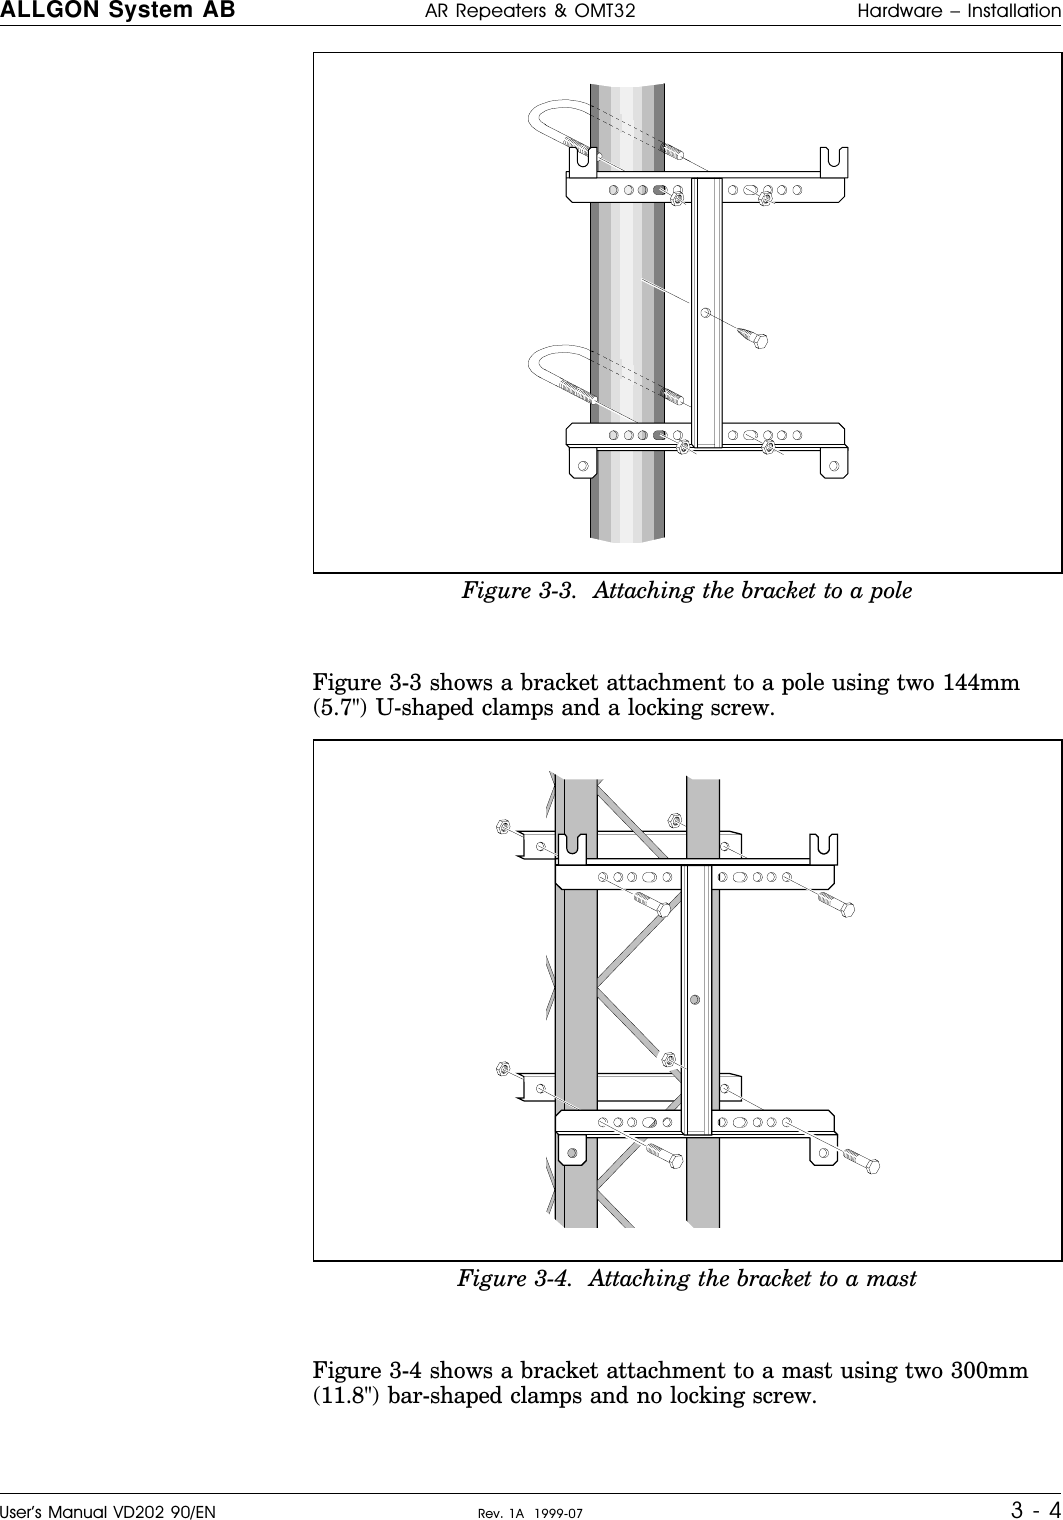    Figure 3-3 shows a bracket attachment to a pole using two 144mm(5.7&quot;) U-shaped clamps and a locking screw.Figure 3-4 shows a bracket attachment to a mast using two 300mm(11.8&quot;) bar-shaped clamps and no locking screw.Figure 3-3.  Attaching the bracket to a poleFigure 3-4.  Attaching the bracket to a mastALLGON System AB AR Repeaters &amp; OMT32 Hardware – InstallationUser’s Manual VD202 90/EN Rev. 1A  1999-07 3 - 4